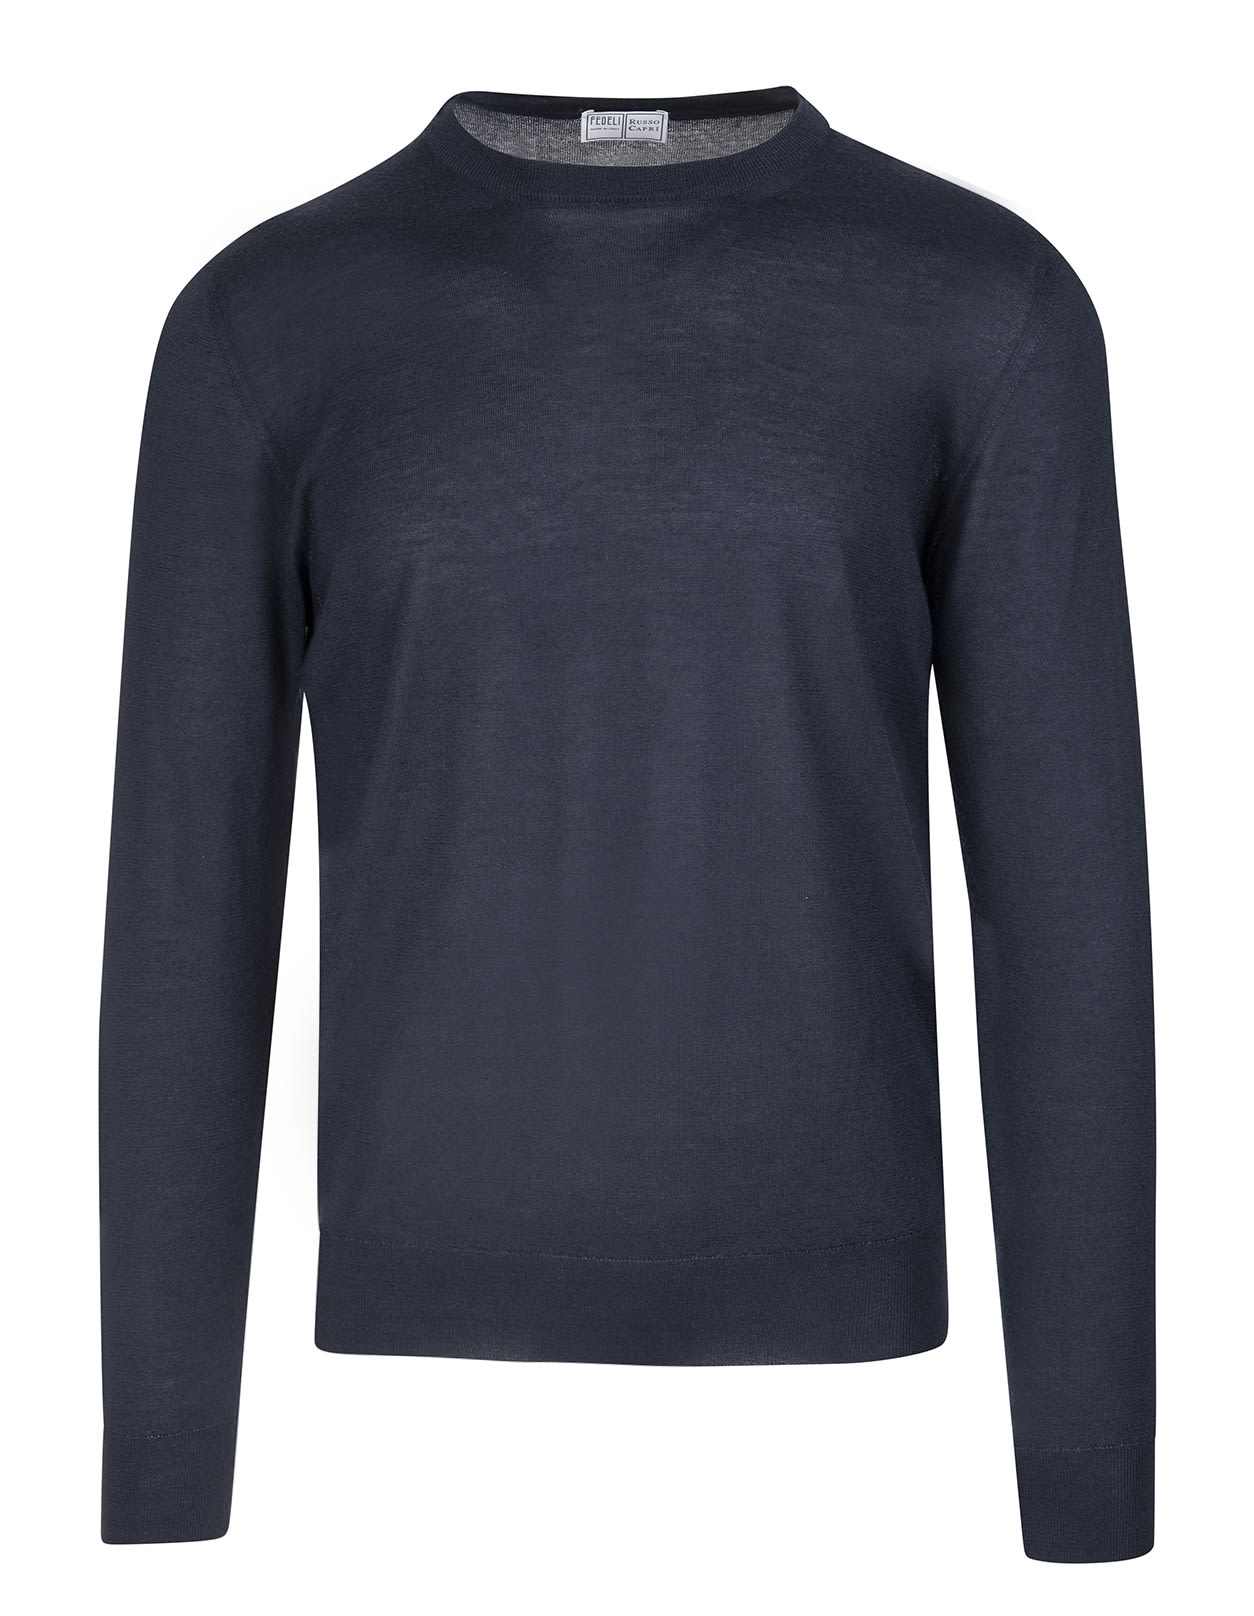 FEDELI MAN ROUND NECK PULLOVER IN ANTHRACITE CASHMERE AND SILK